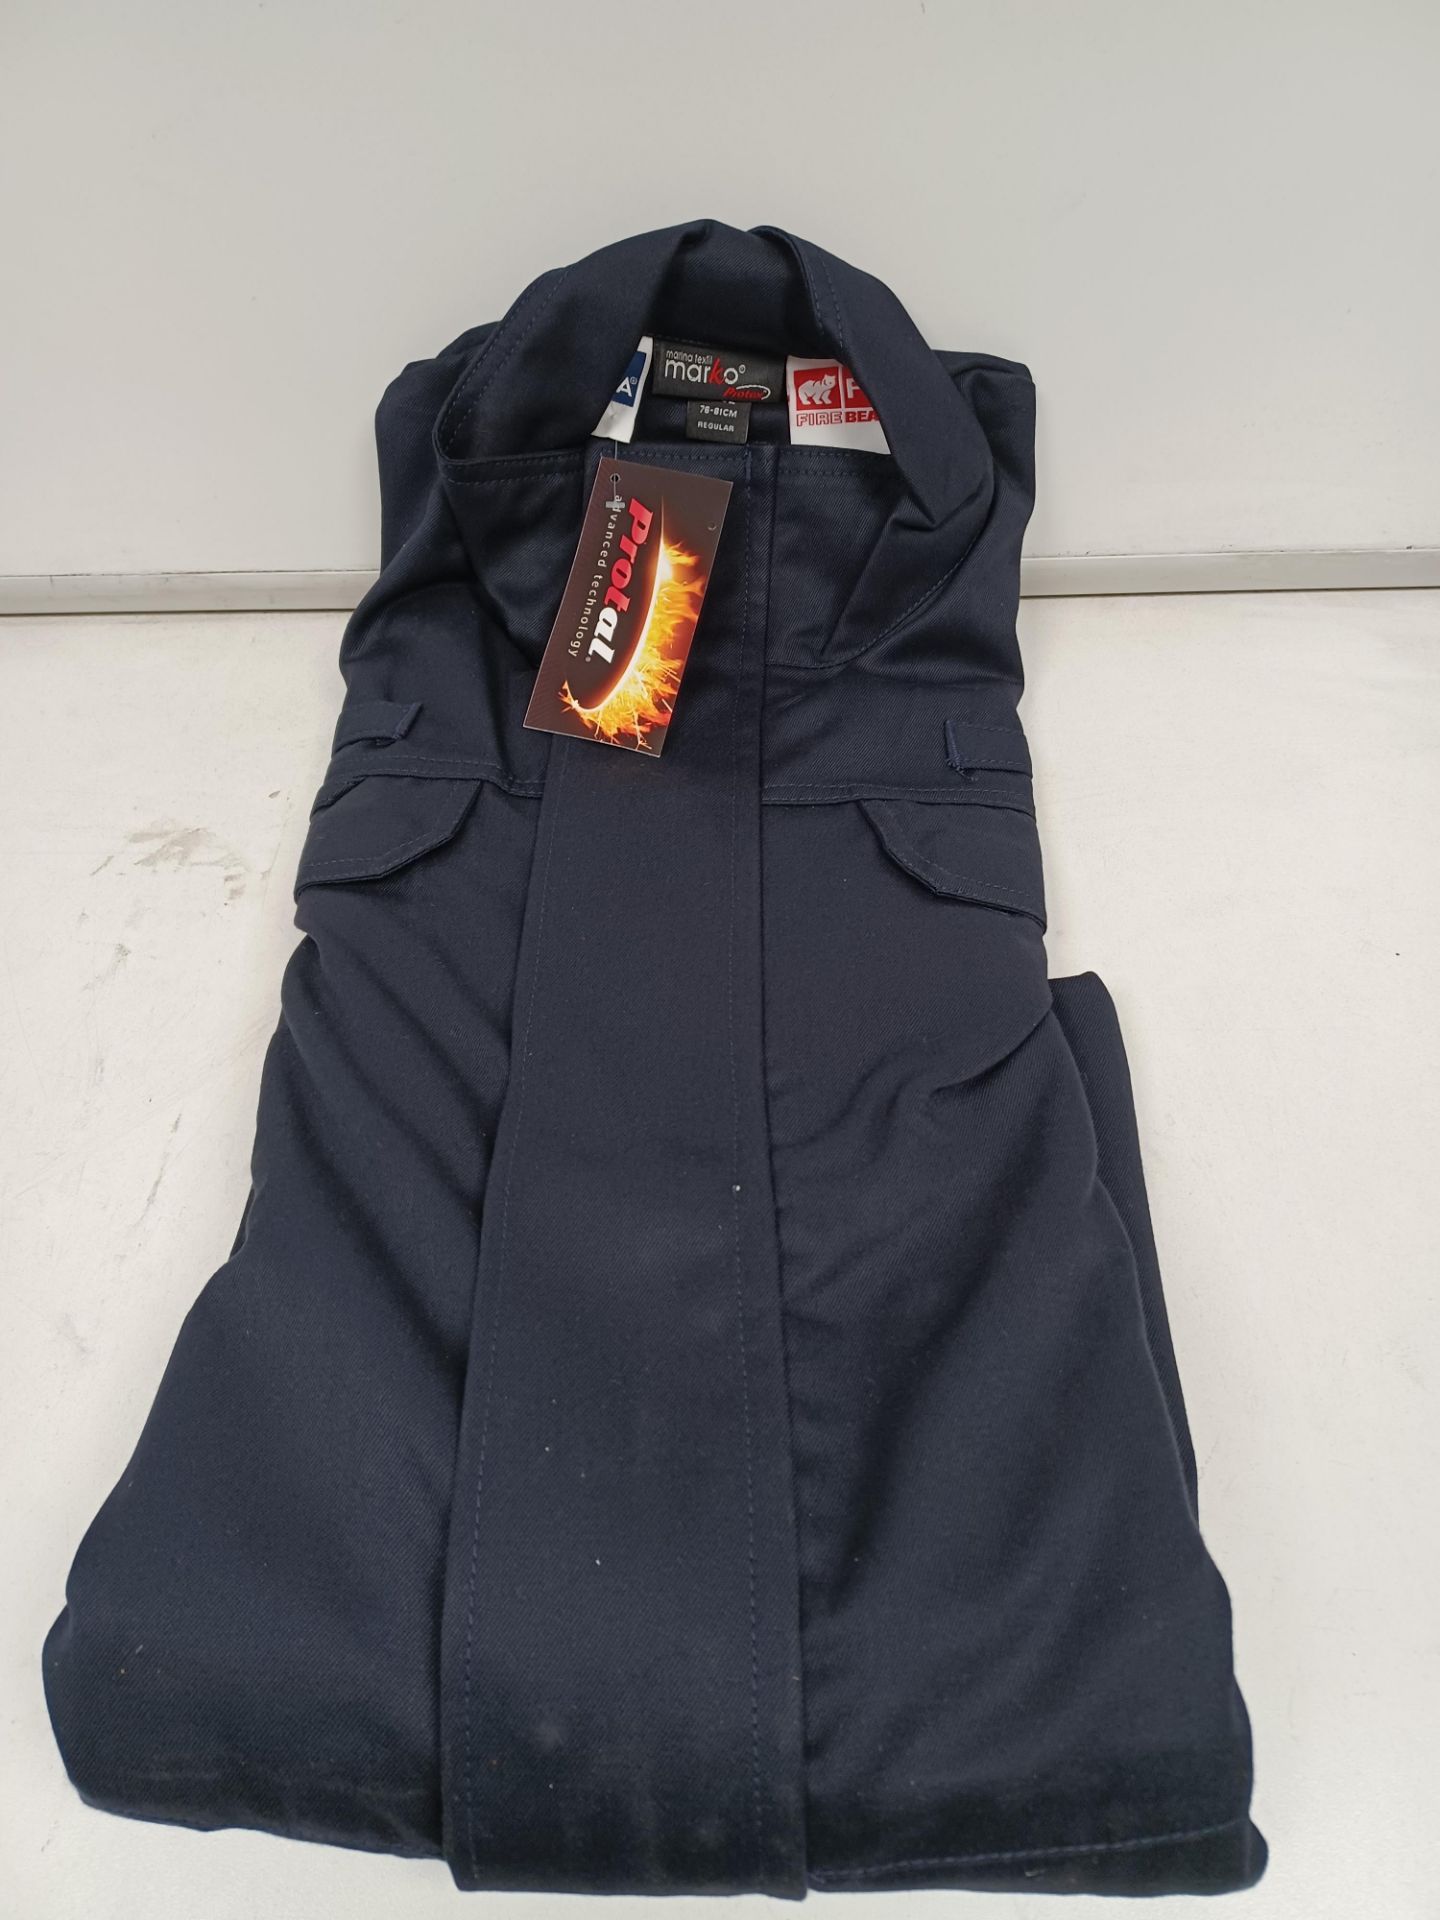 20 X BRAND NEW PROTAL NAVY COVERALLS (SIZES MAY VARY) R19-4